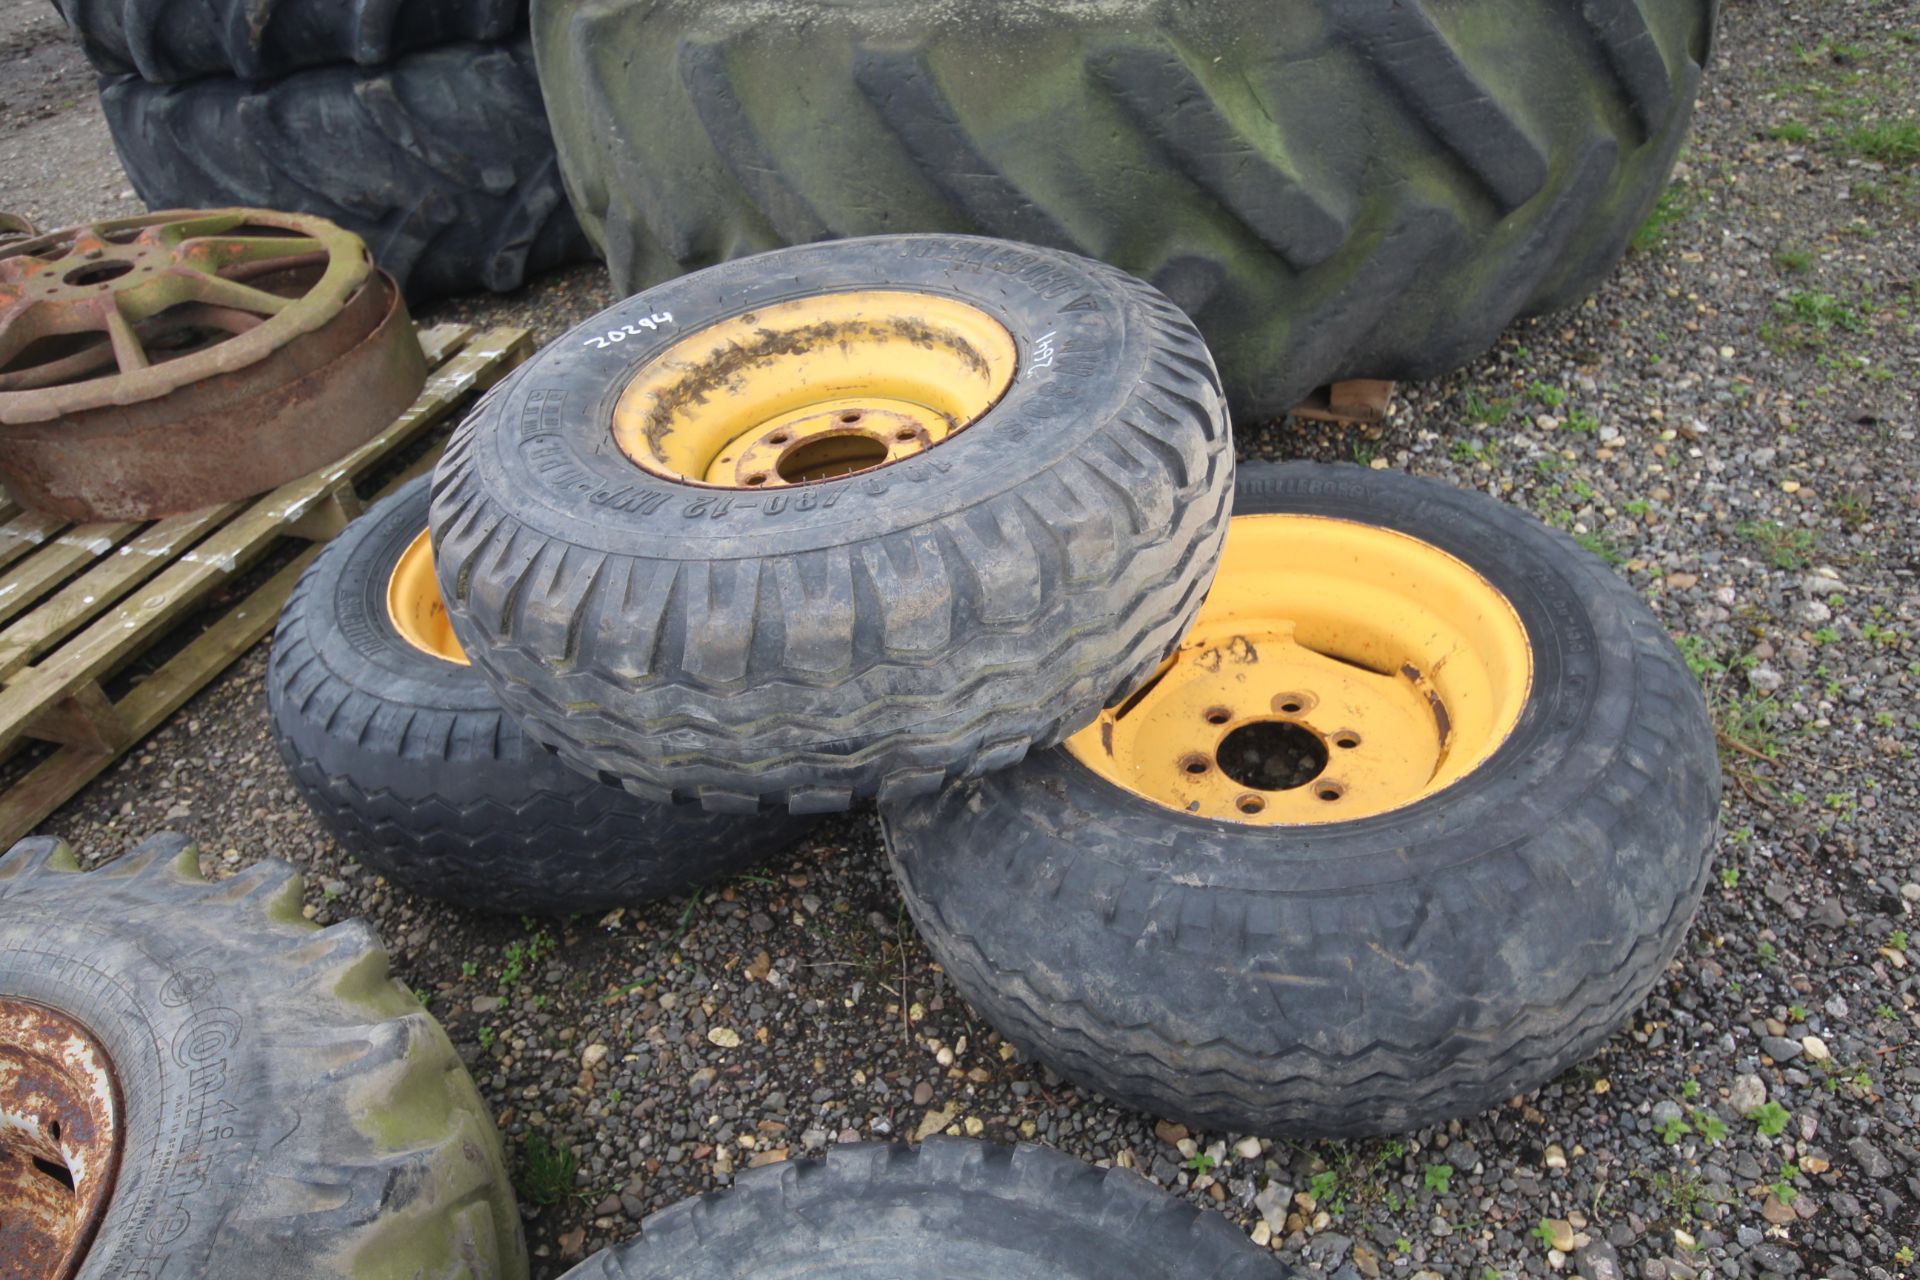 3x trailer wheels and tyres. V